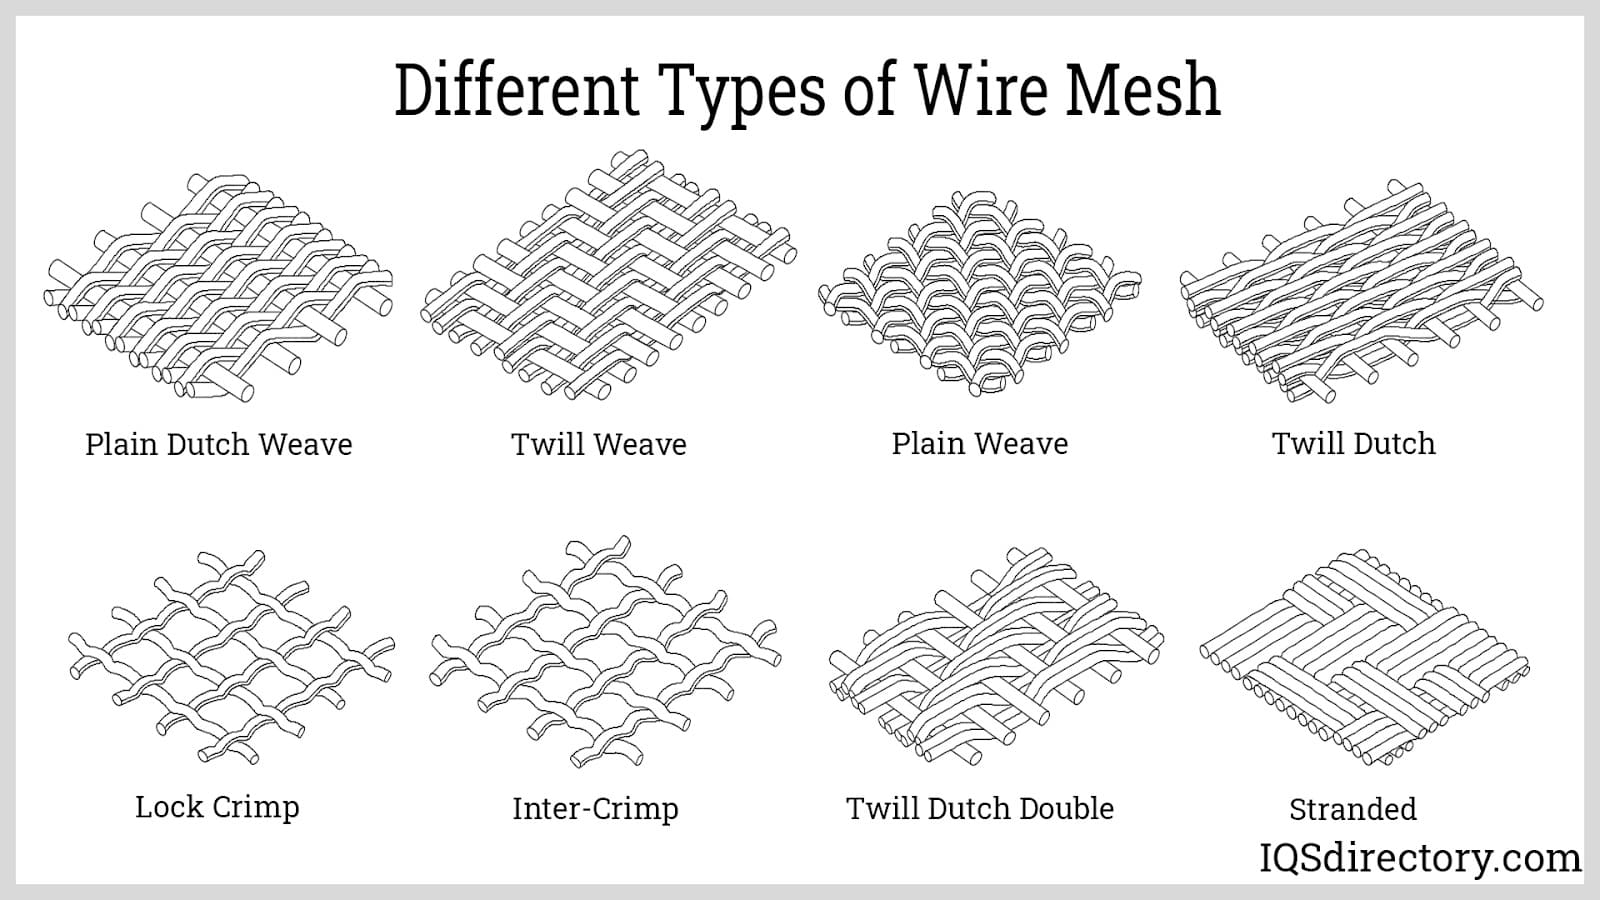 https://www.iqsdirectory.com/articles/wire-mesh/basics-of-wire-mesh/different-types-of-wire-mesh.jpg